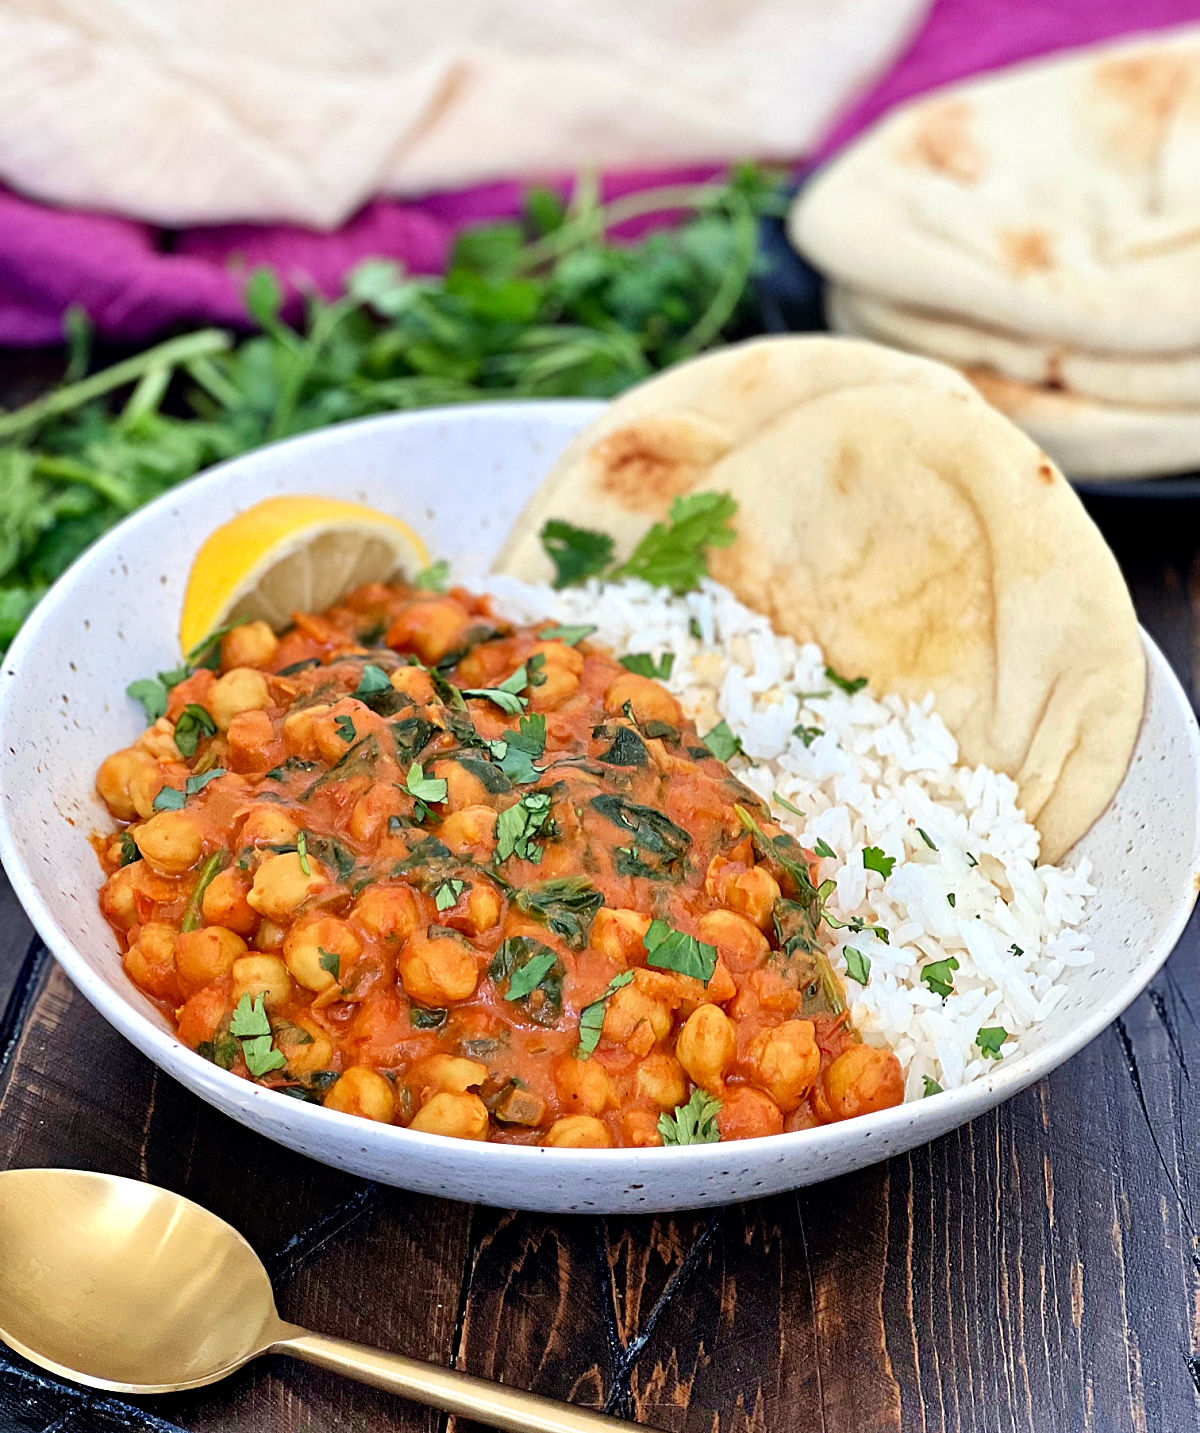 A white bowl with chickpea spinach curry and white rice with naan bread.